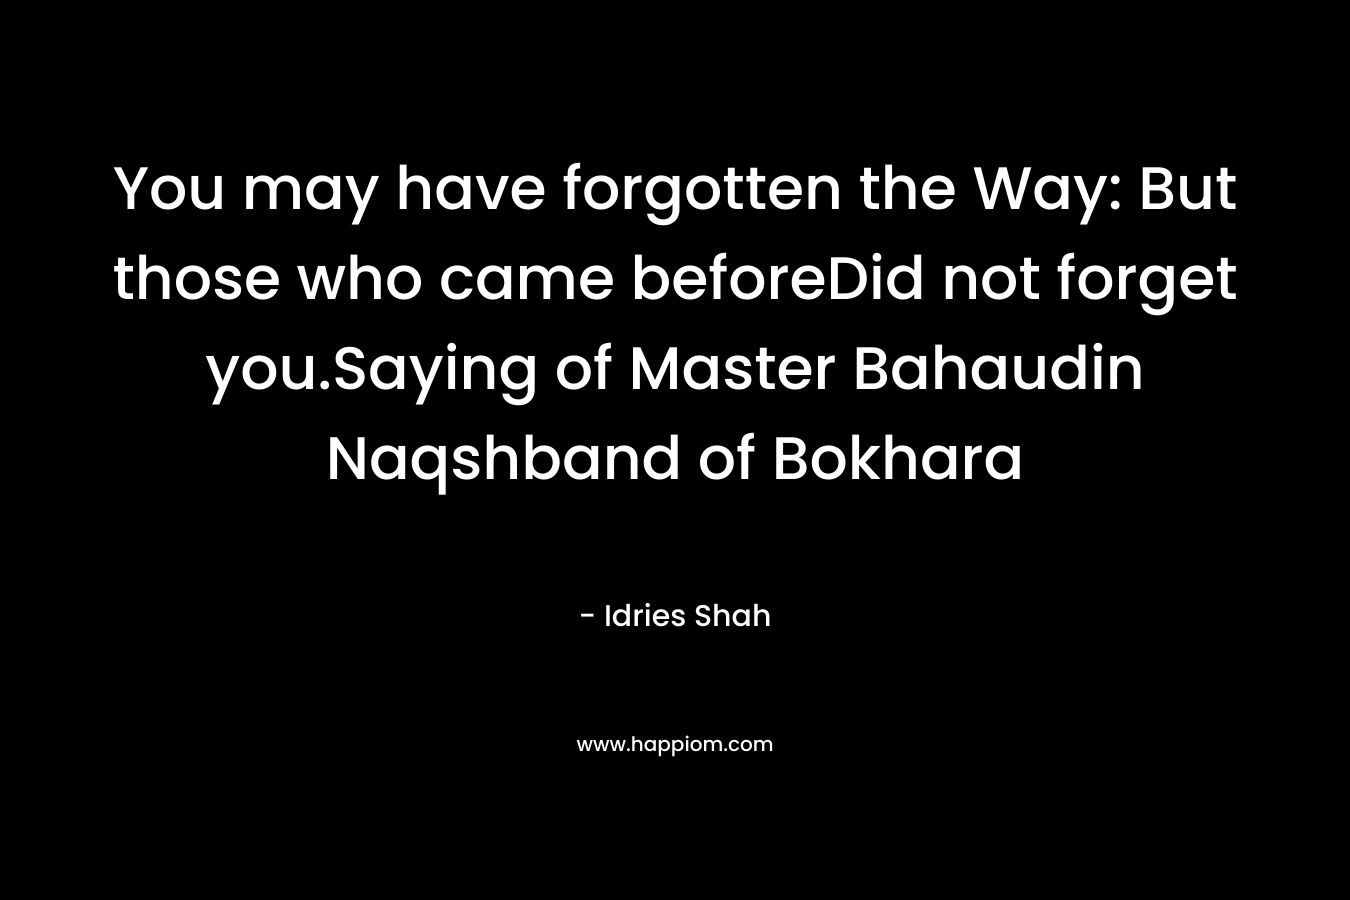 You may have forgotten the Way: But those who came beforeDid not forget you.Saying of Master Bahaudin Naqshband of Bokhara